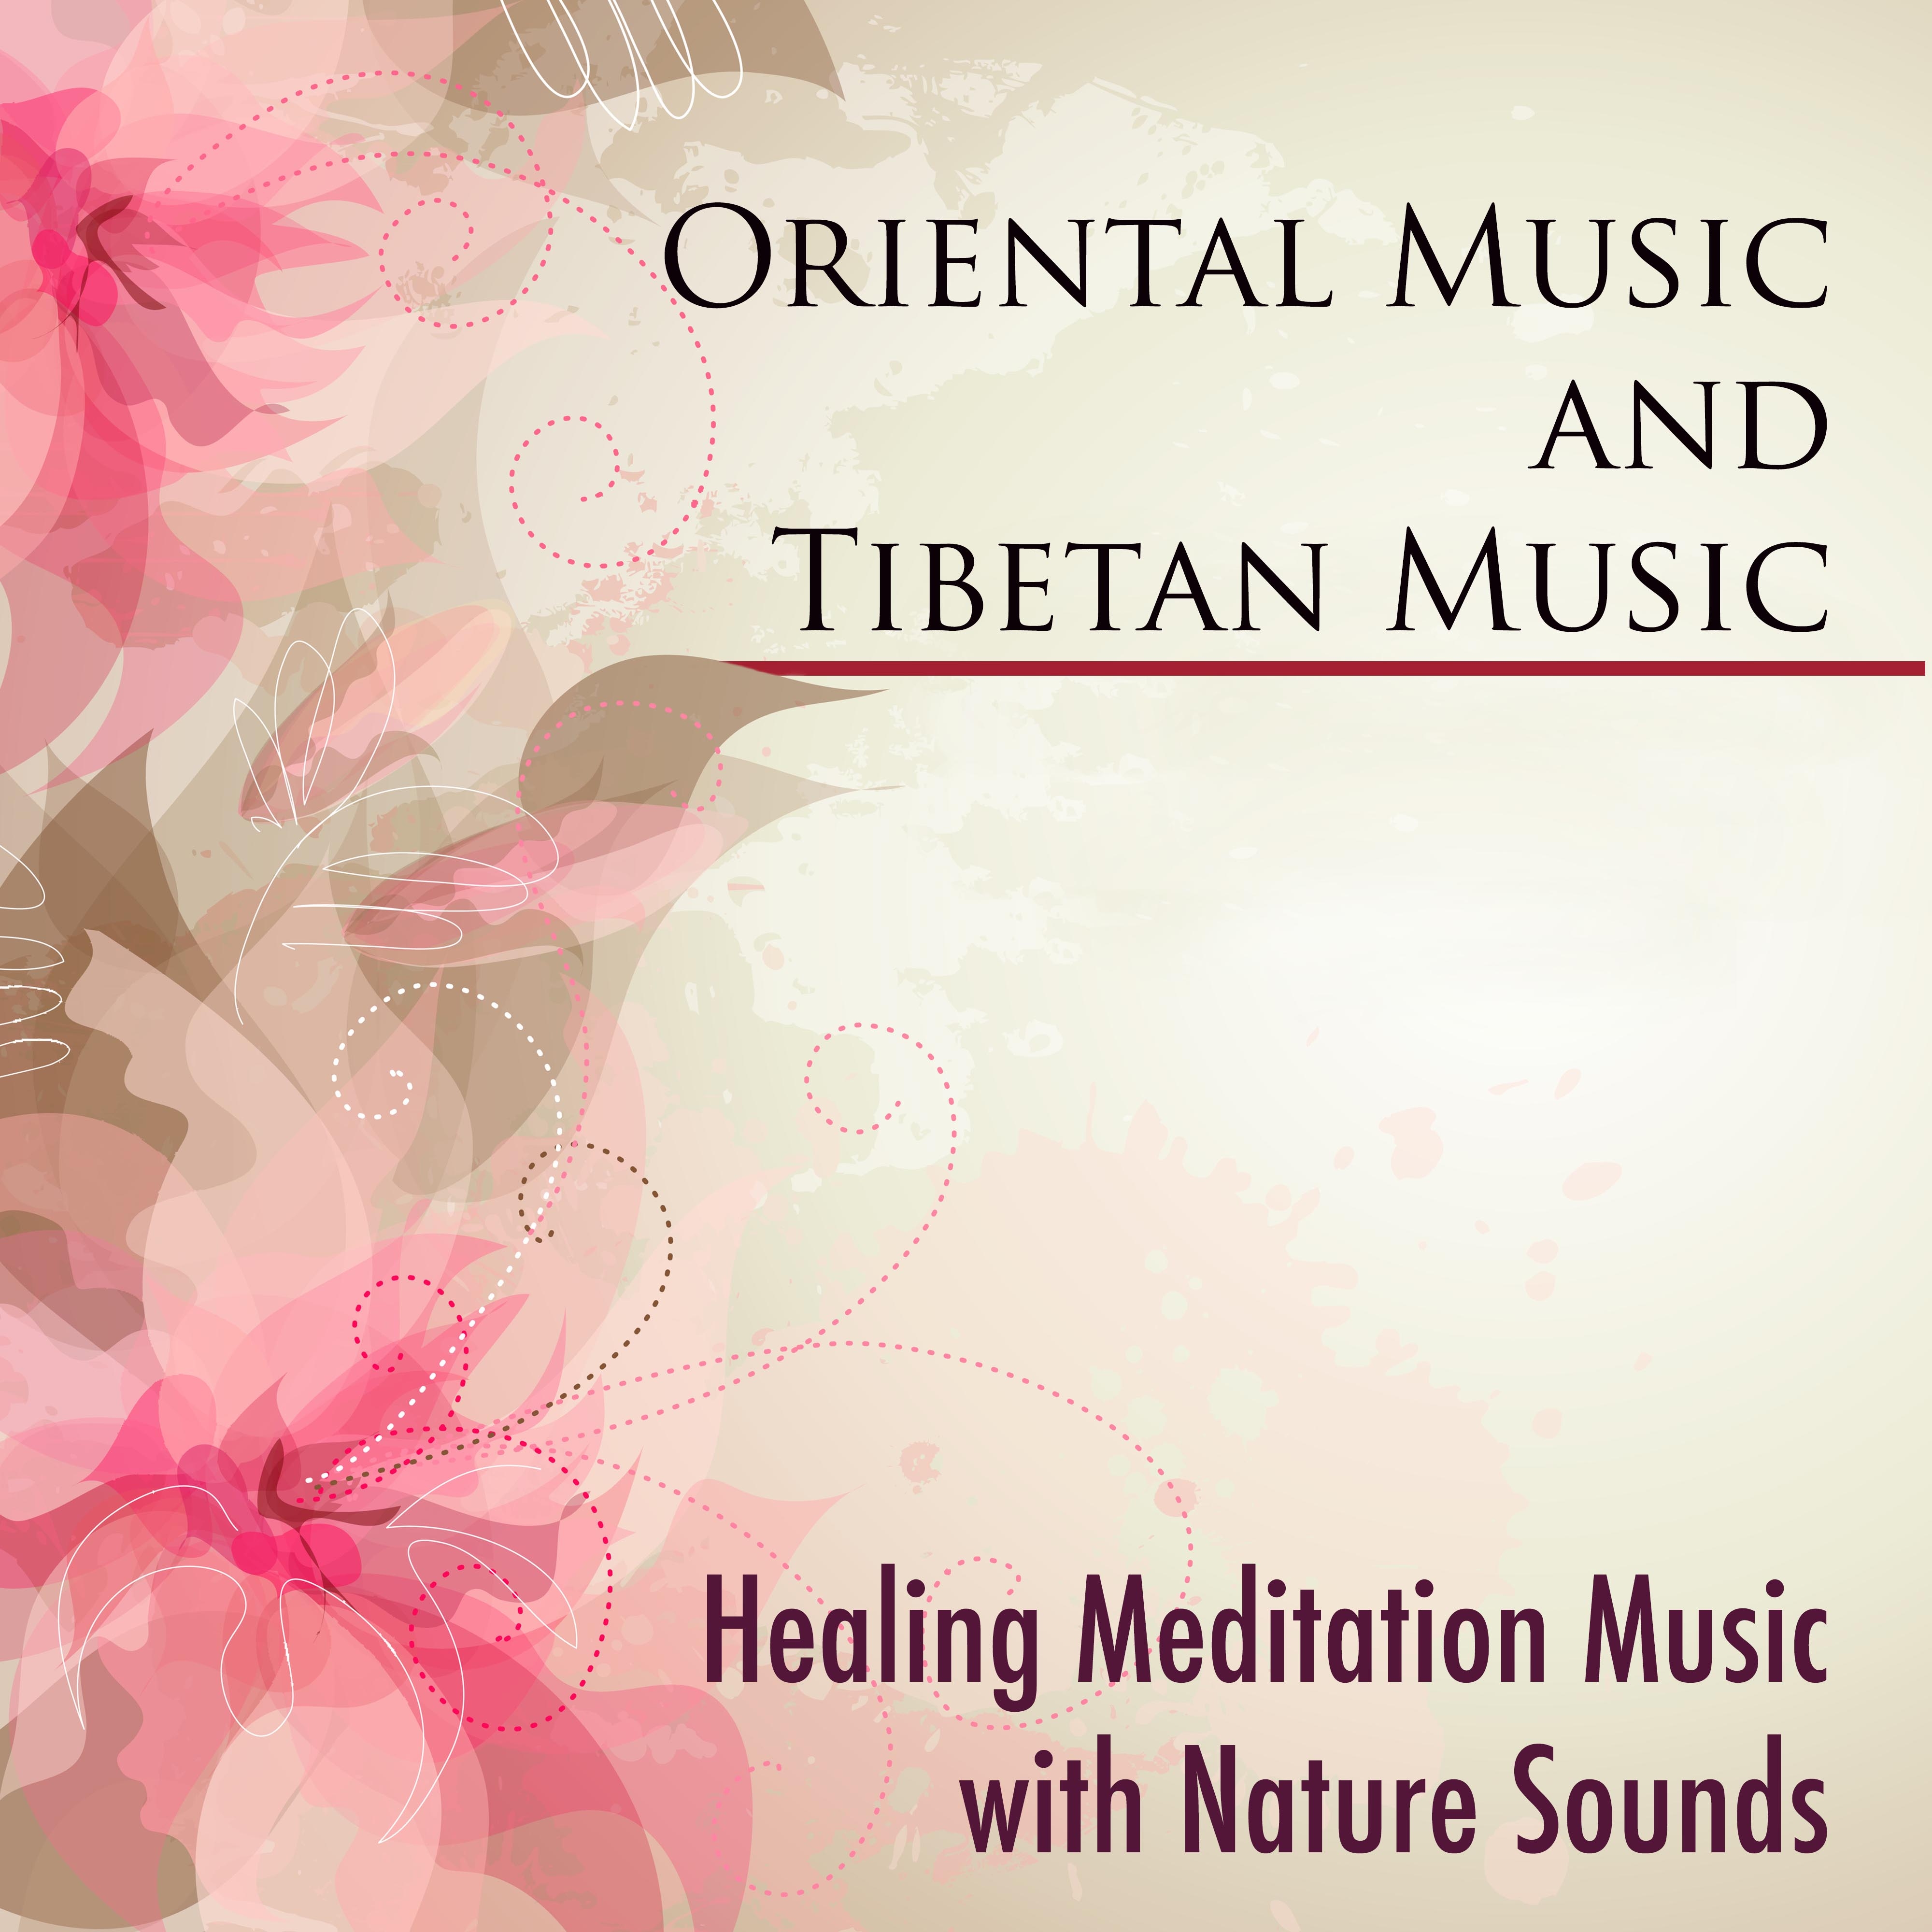 Oriental Music and Tibetan Music - Healing Meditation Music with Nature Sounds and Eastern Flute Music for Tibetan Meditation with Buddhist Music for Relaxation and Chakra Balancing